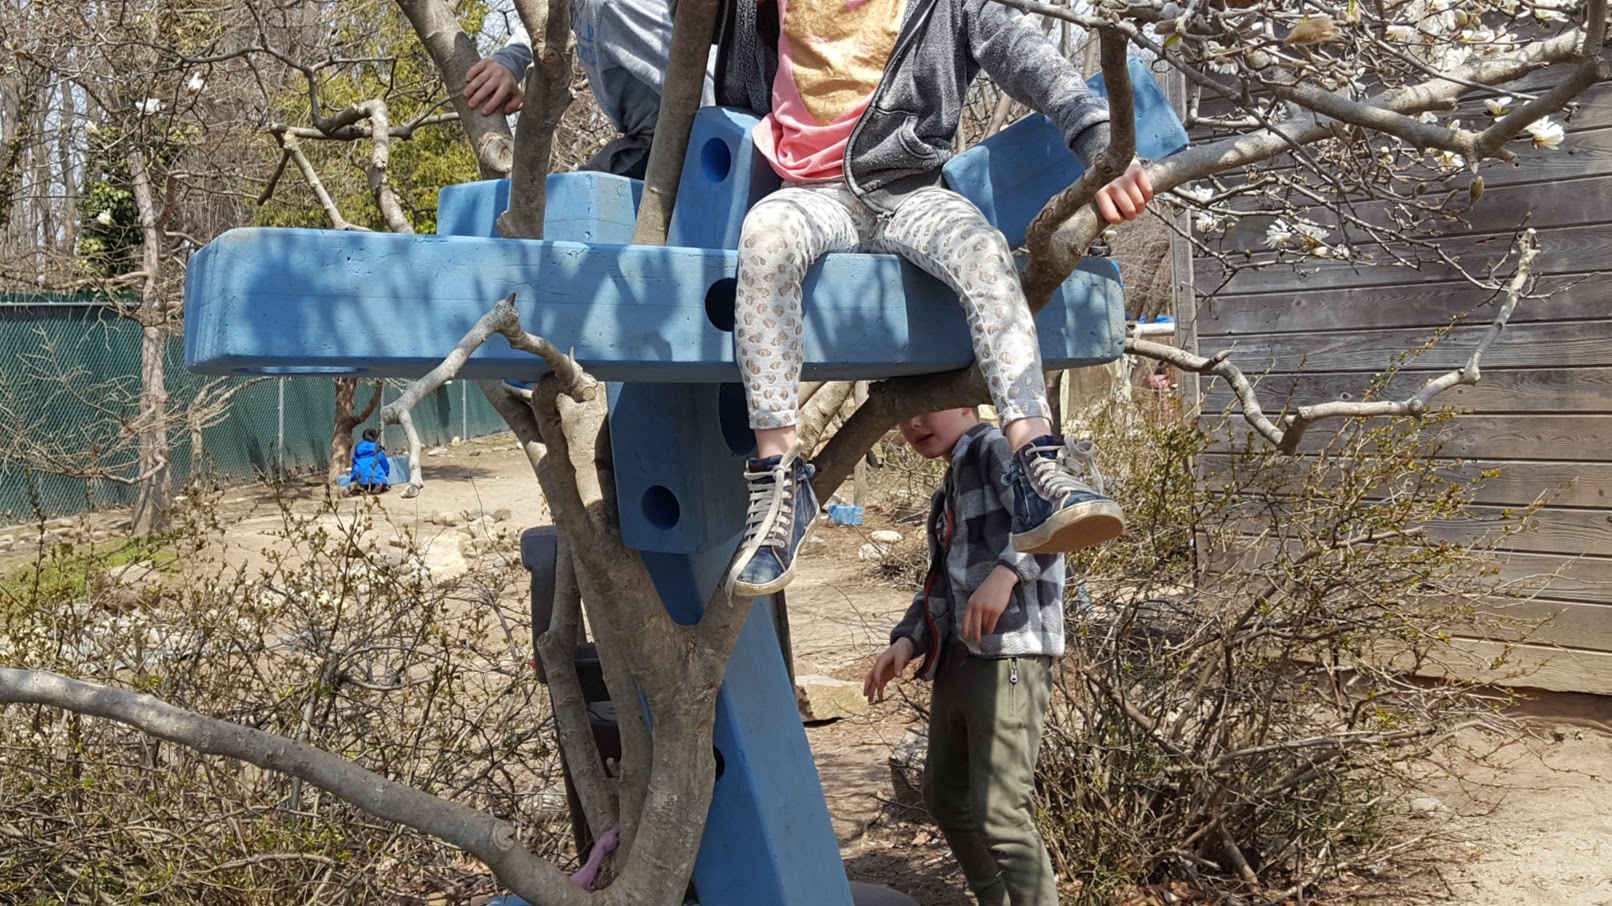  Children sit and climb around on blue foam Imagination Playground blocks that have been set into the branches of a tree.  